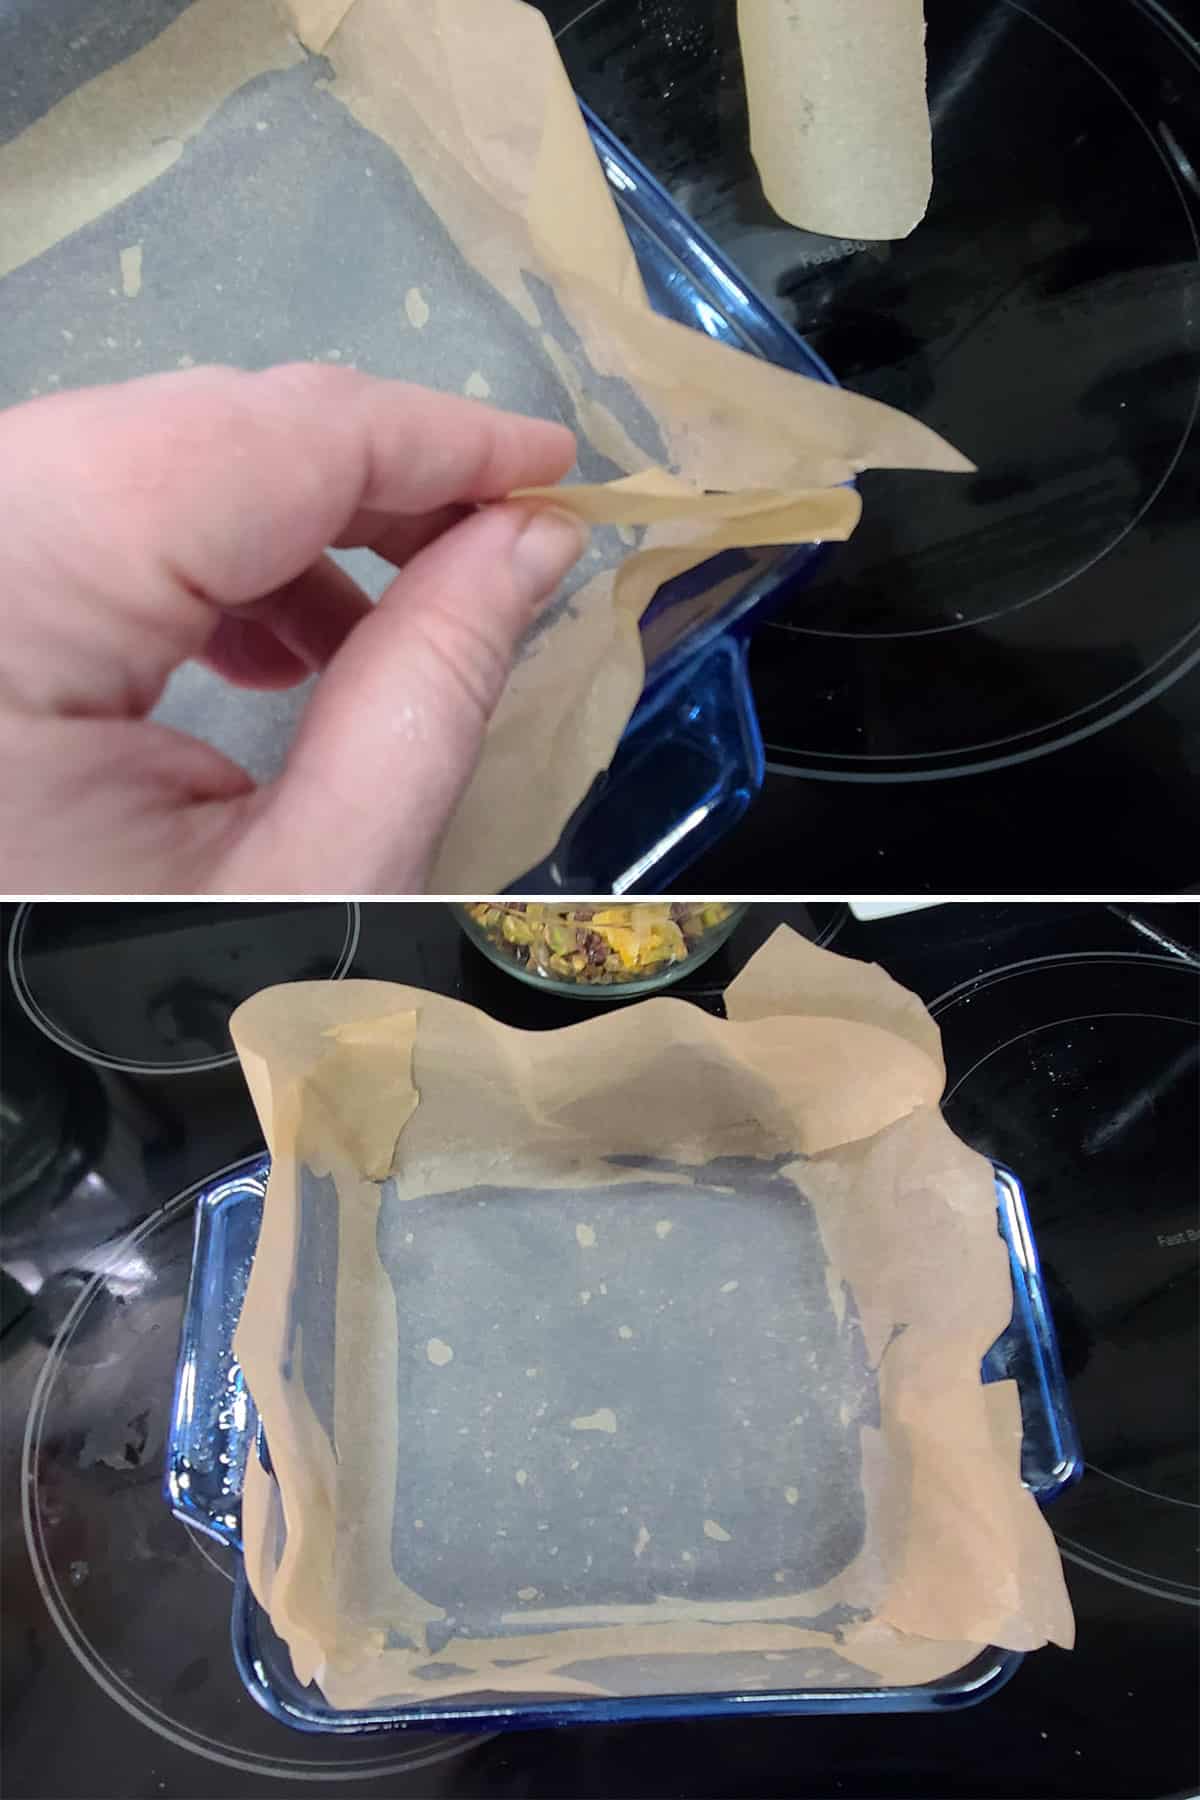 A 2 part image showing a greased baking pan being lined with parchment paper.